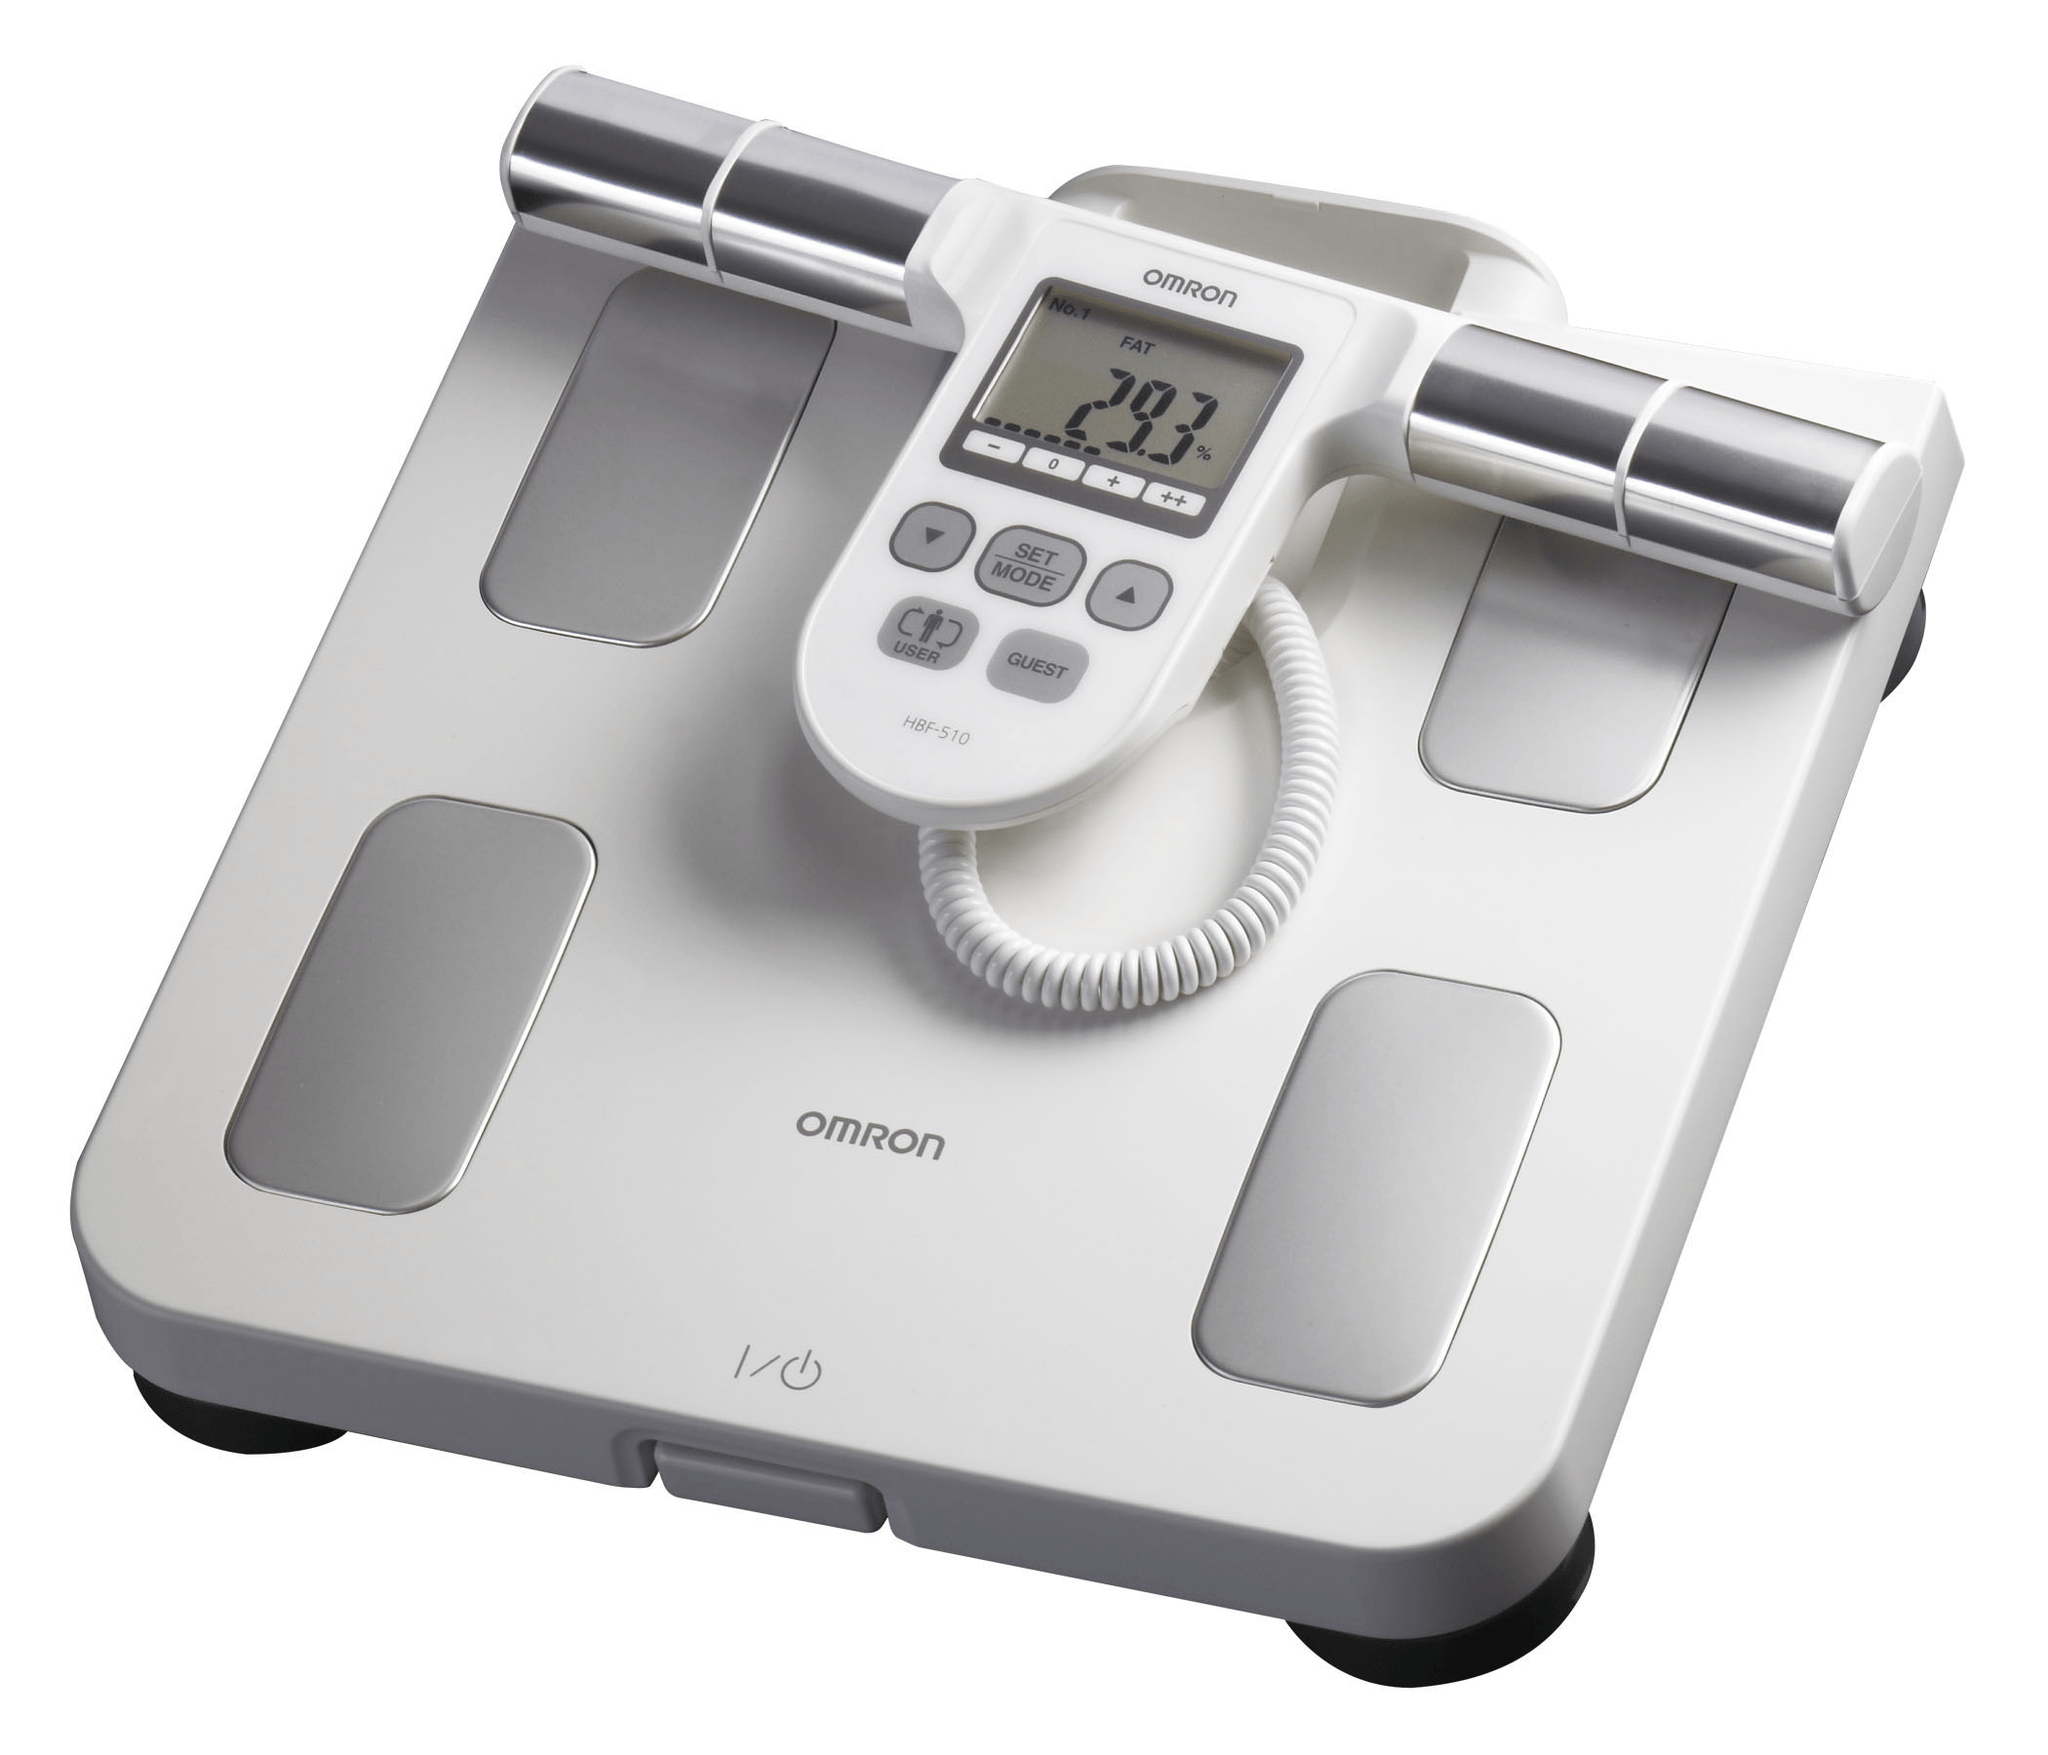 How to Use Omron Body Composition Scale 